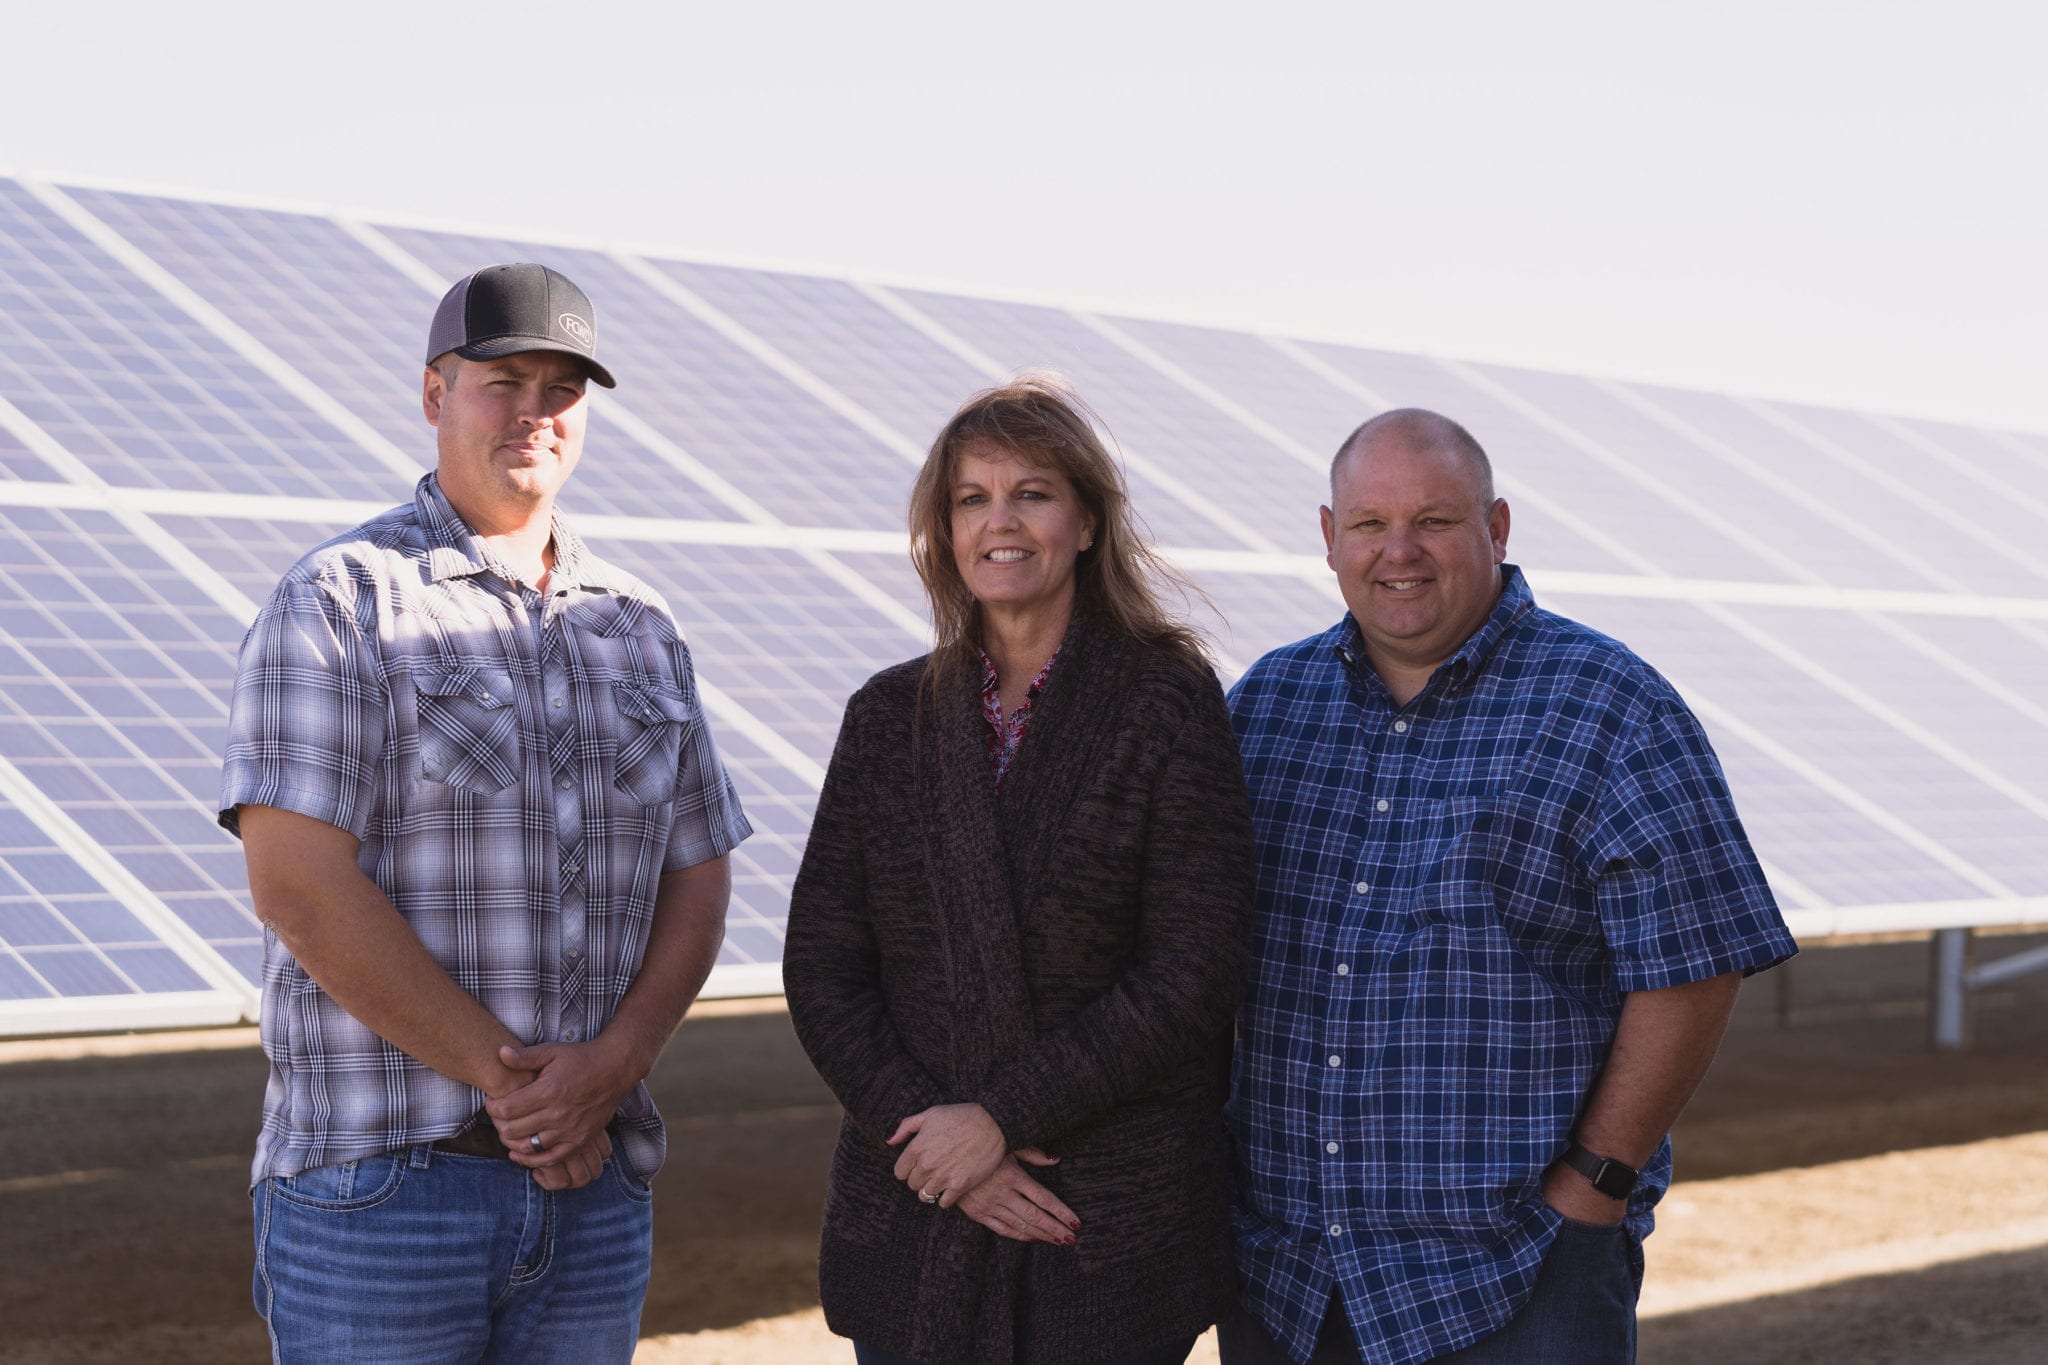 Three employees from Hammonds Ranch in Firebaugh, California standing in front of their solar panels.